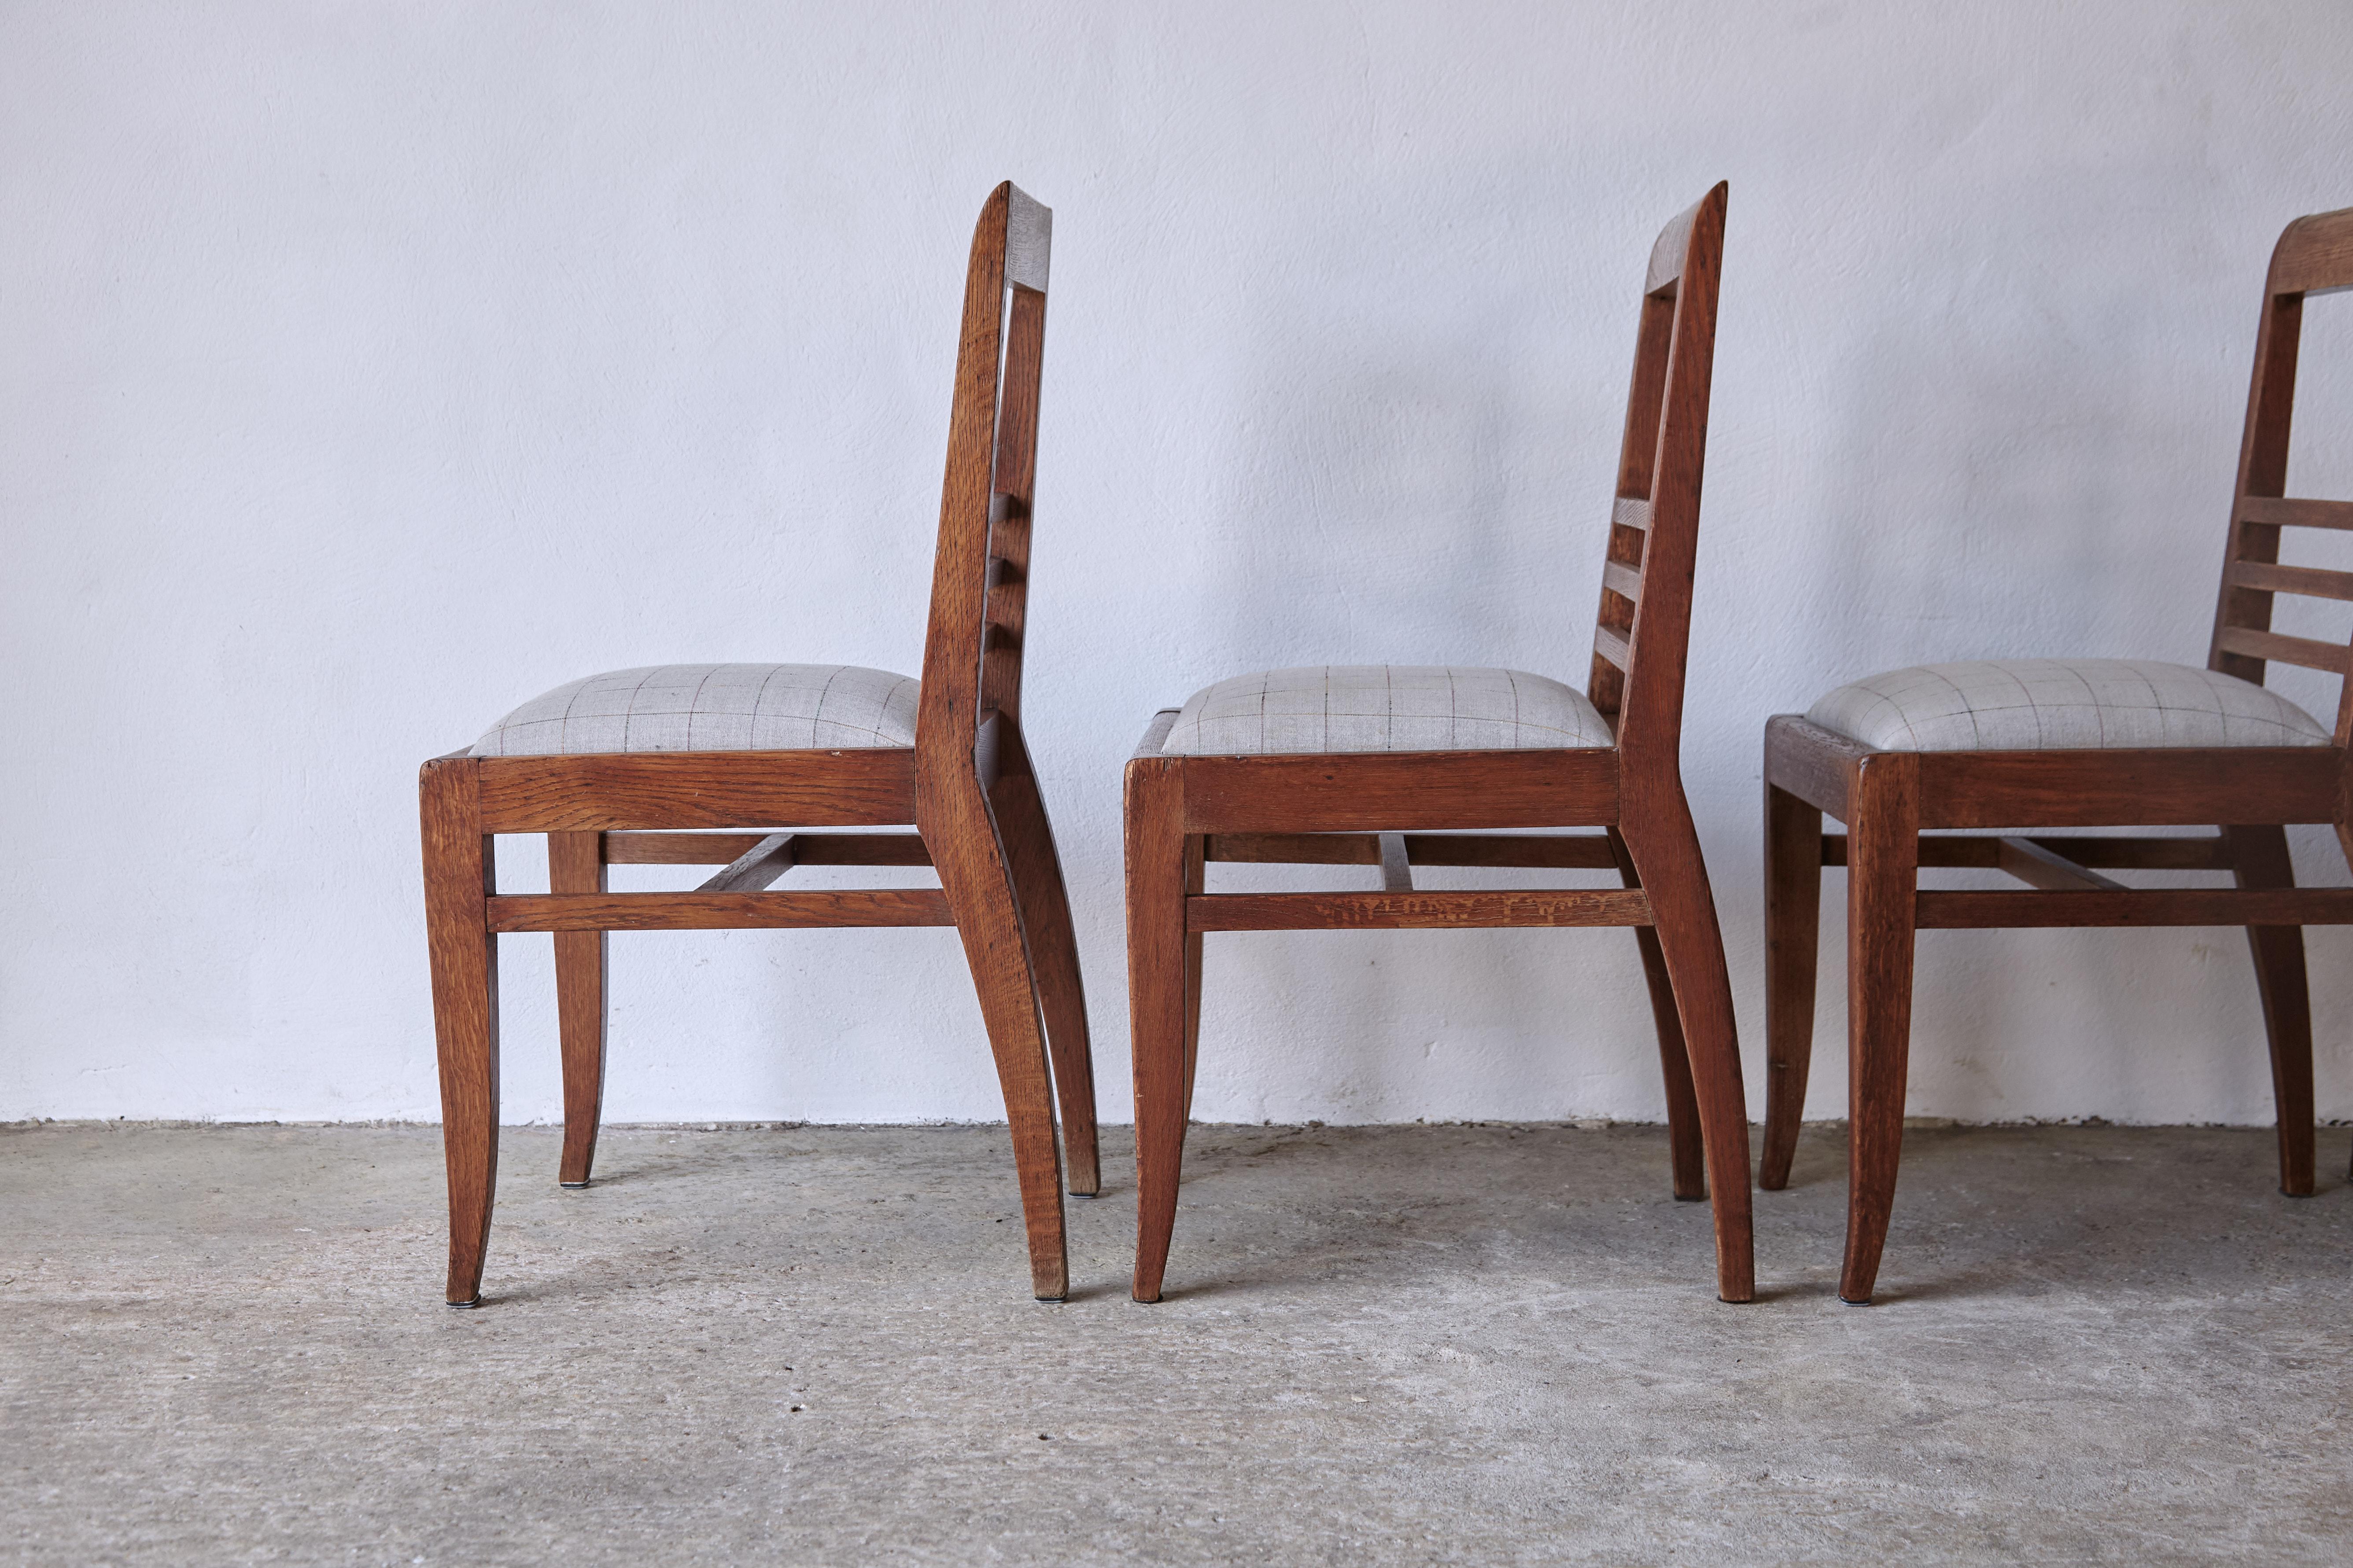 Rare Set of 6 Michel Dufet 'Duffet' Dining Chairs, 1950s, France For Sale 4